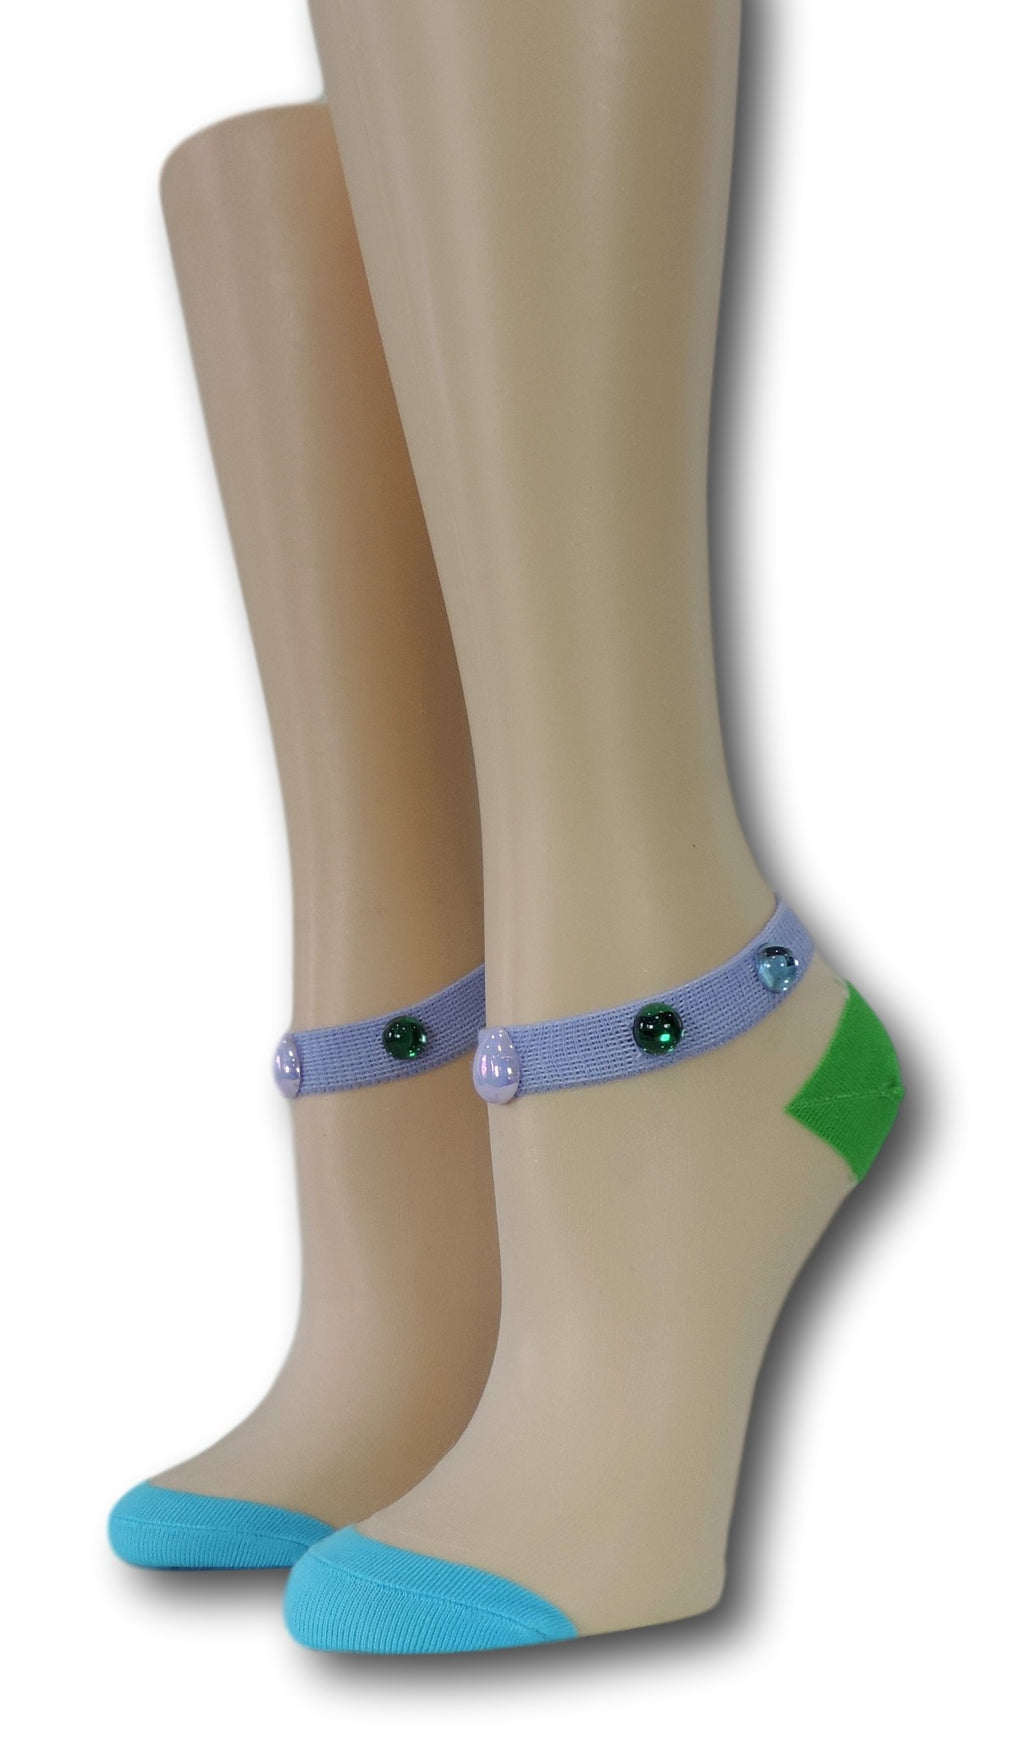 Blue-Green Ankle Sheer Socks with beads